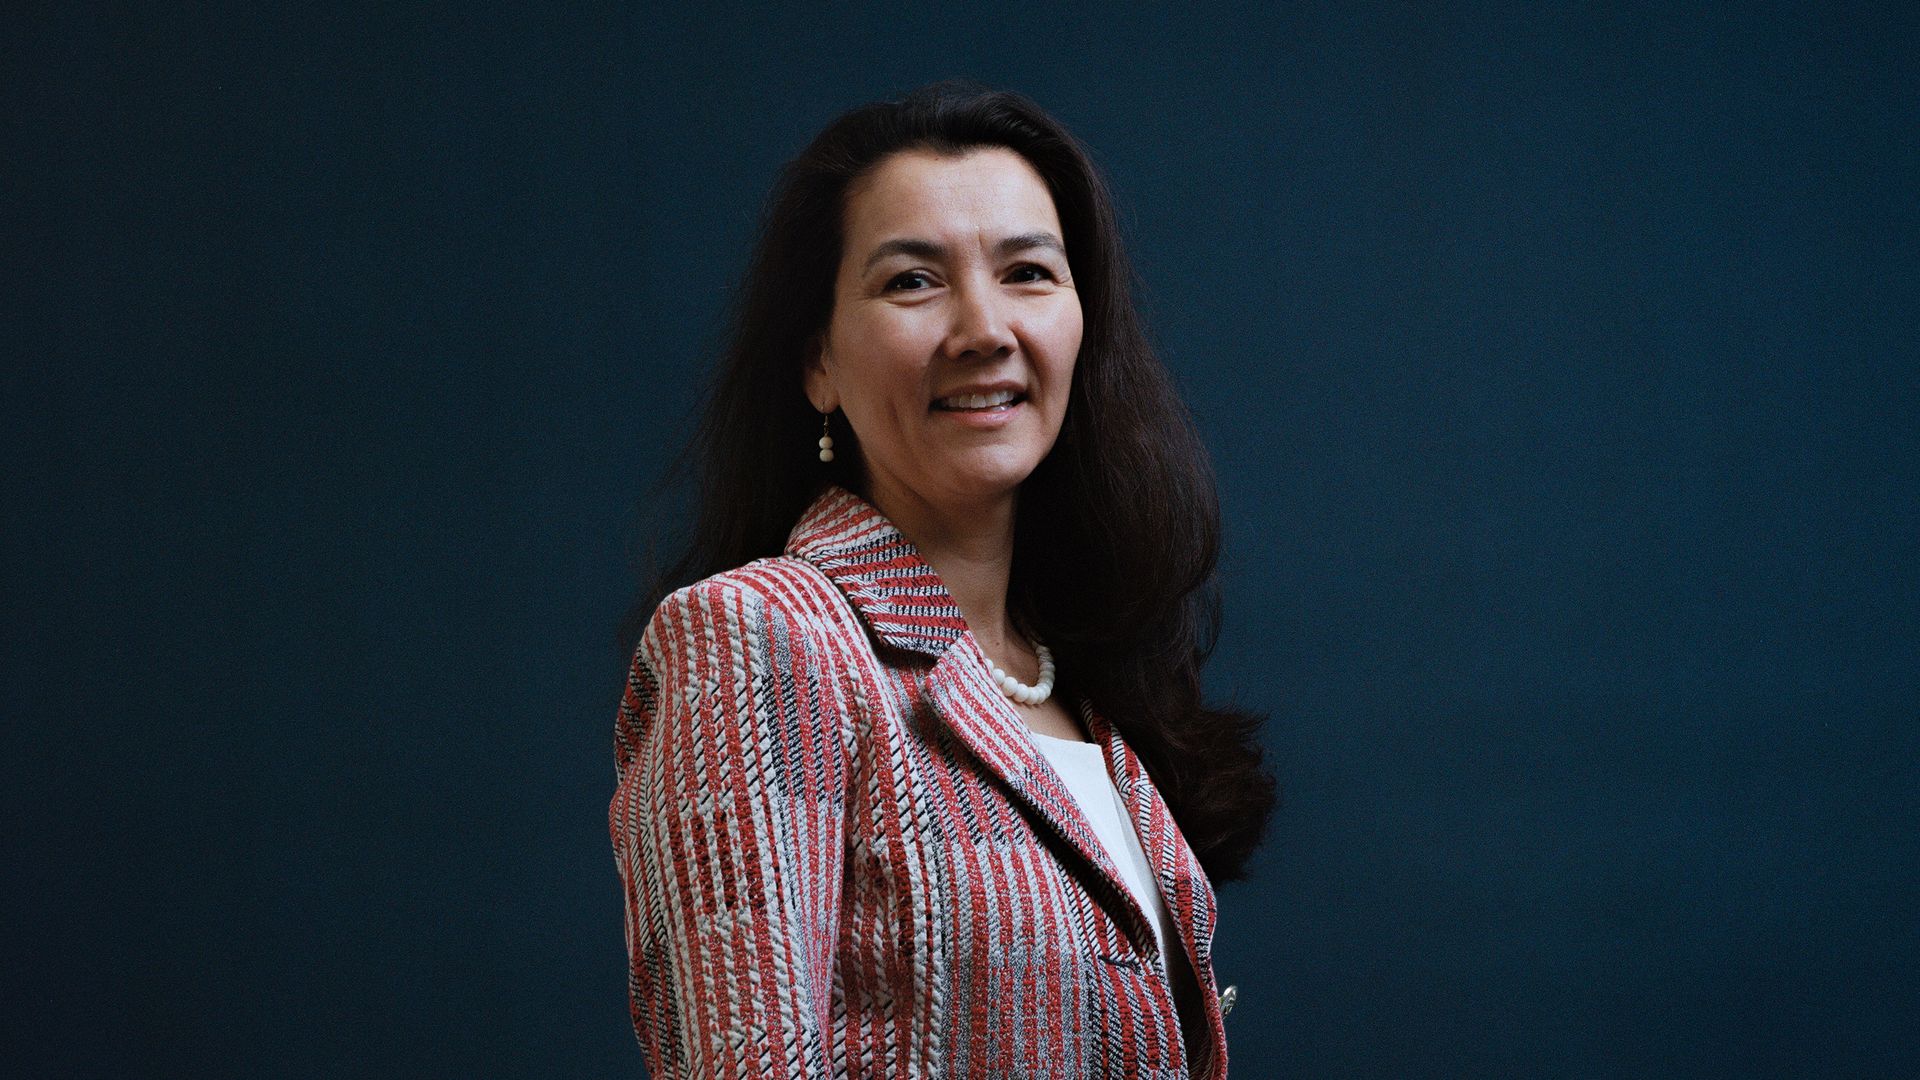 Democrat Mary Peltola, wearing a red and gray jacket, white shirt, pearl necklace and black pants, poses for a photo in front of a dark blue backdrop.